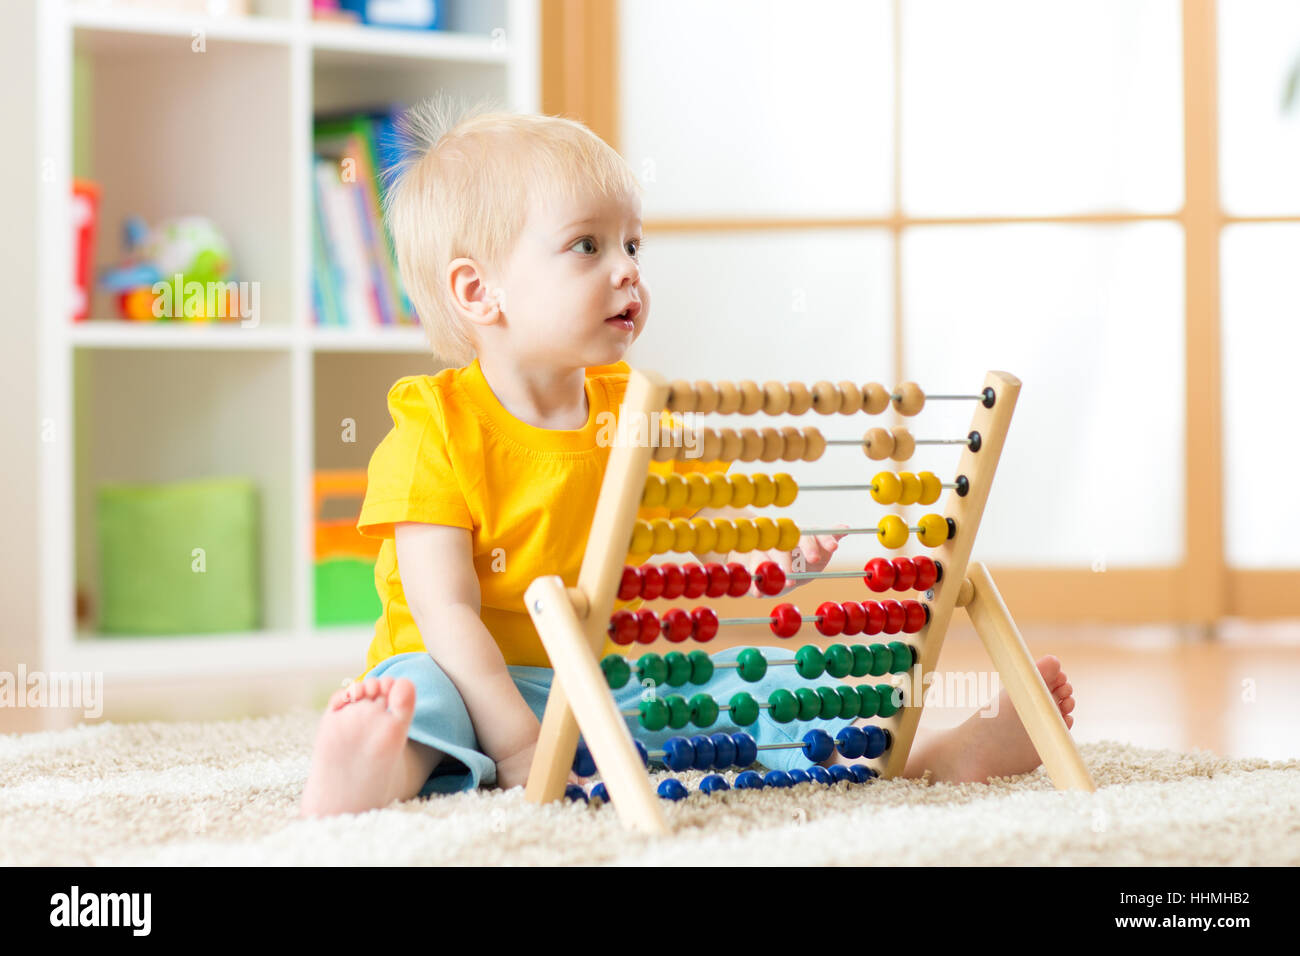 Preschooler baby learns to count. Cute child playing with abacus toy. Little boy having fun indoors at kindergarten, playschool, home or daycare centre. Educational concept for preschool kids. Stock Photo